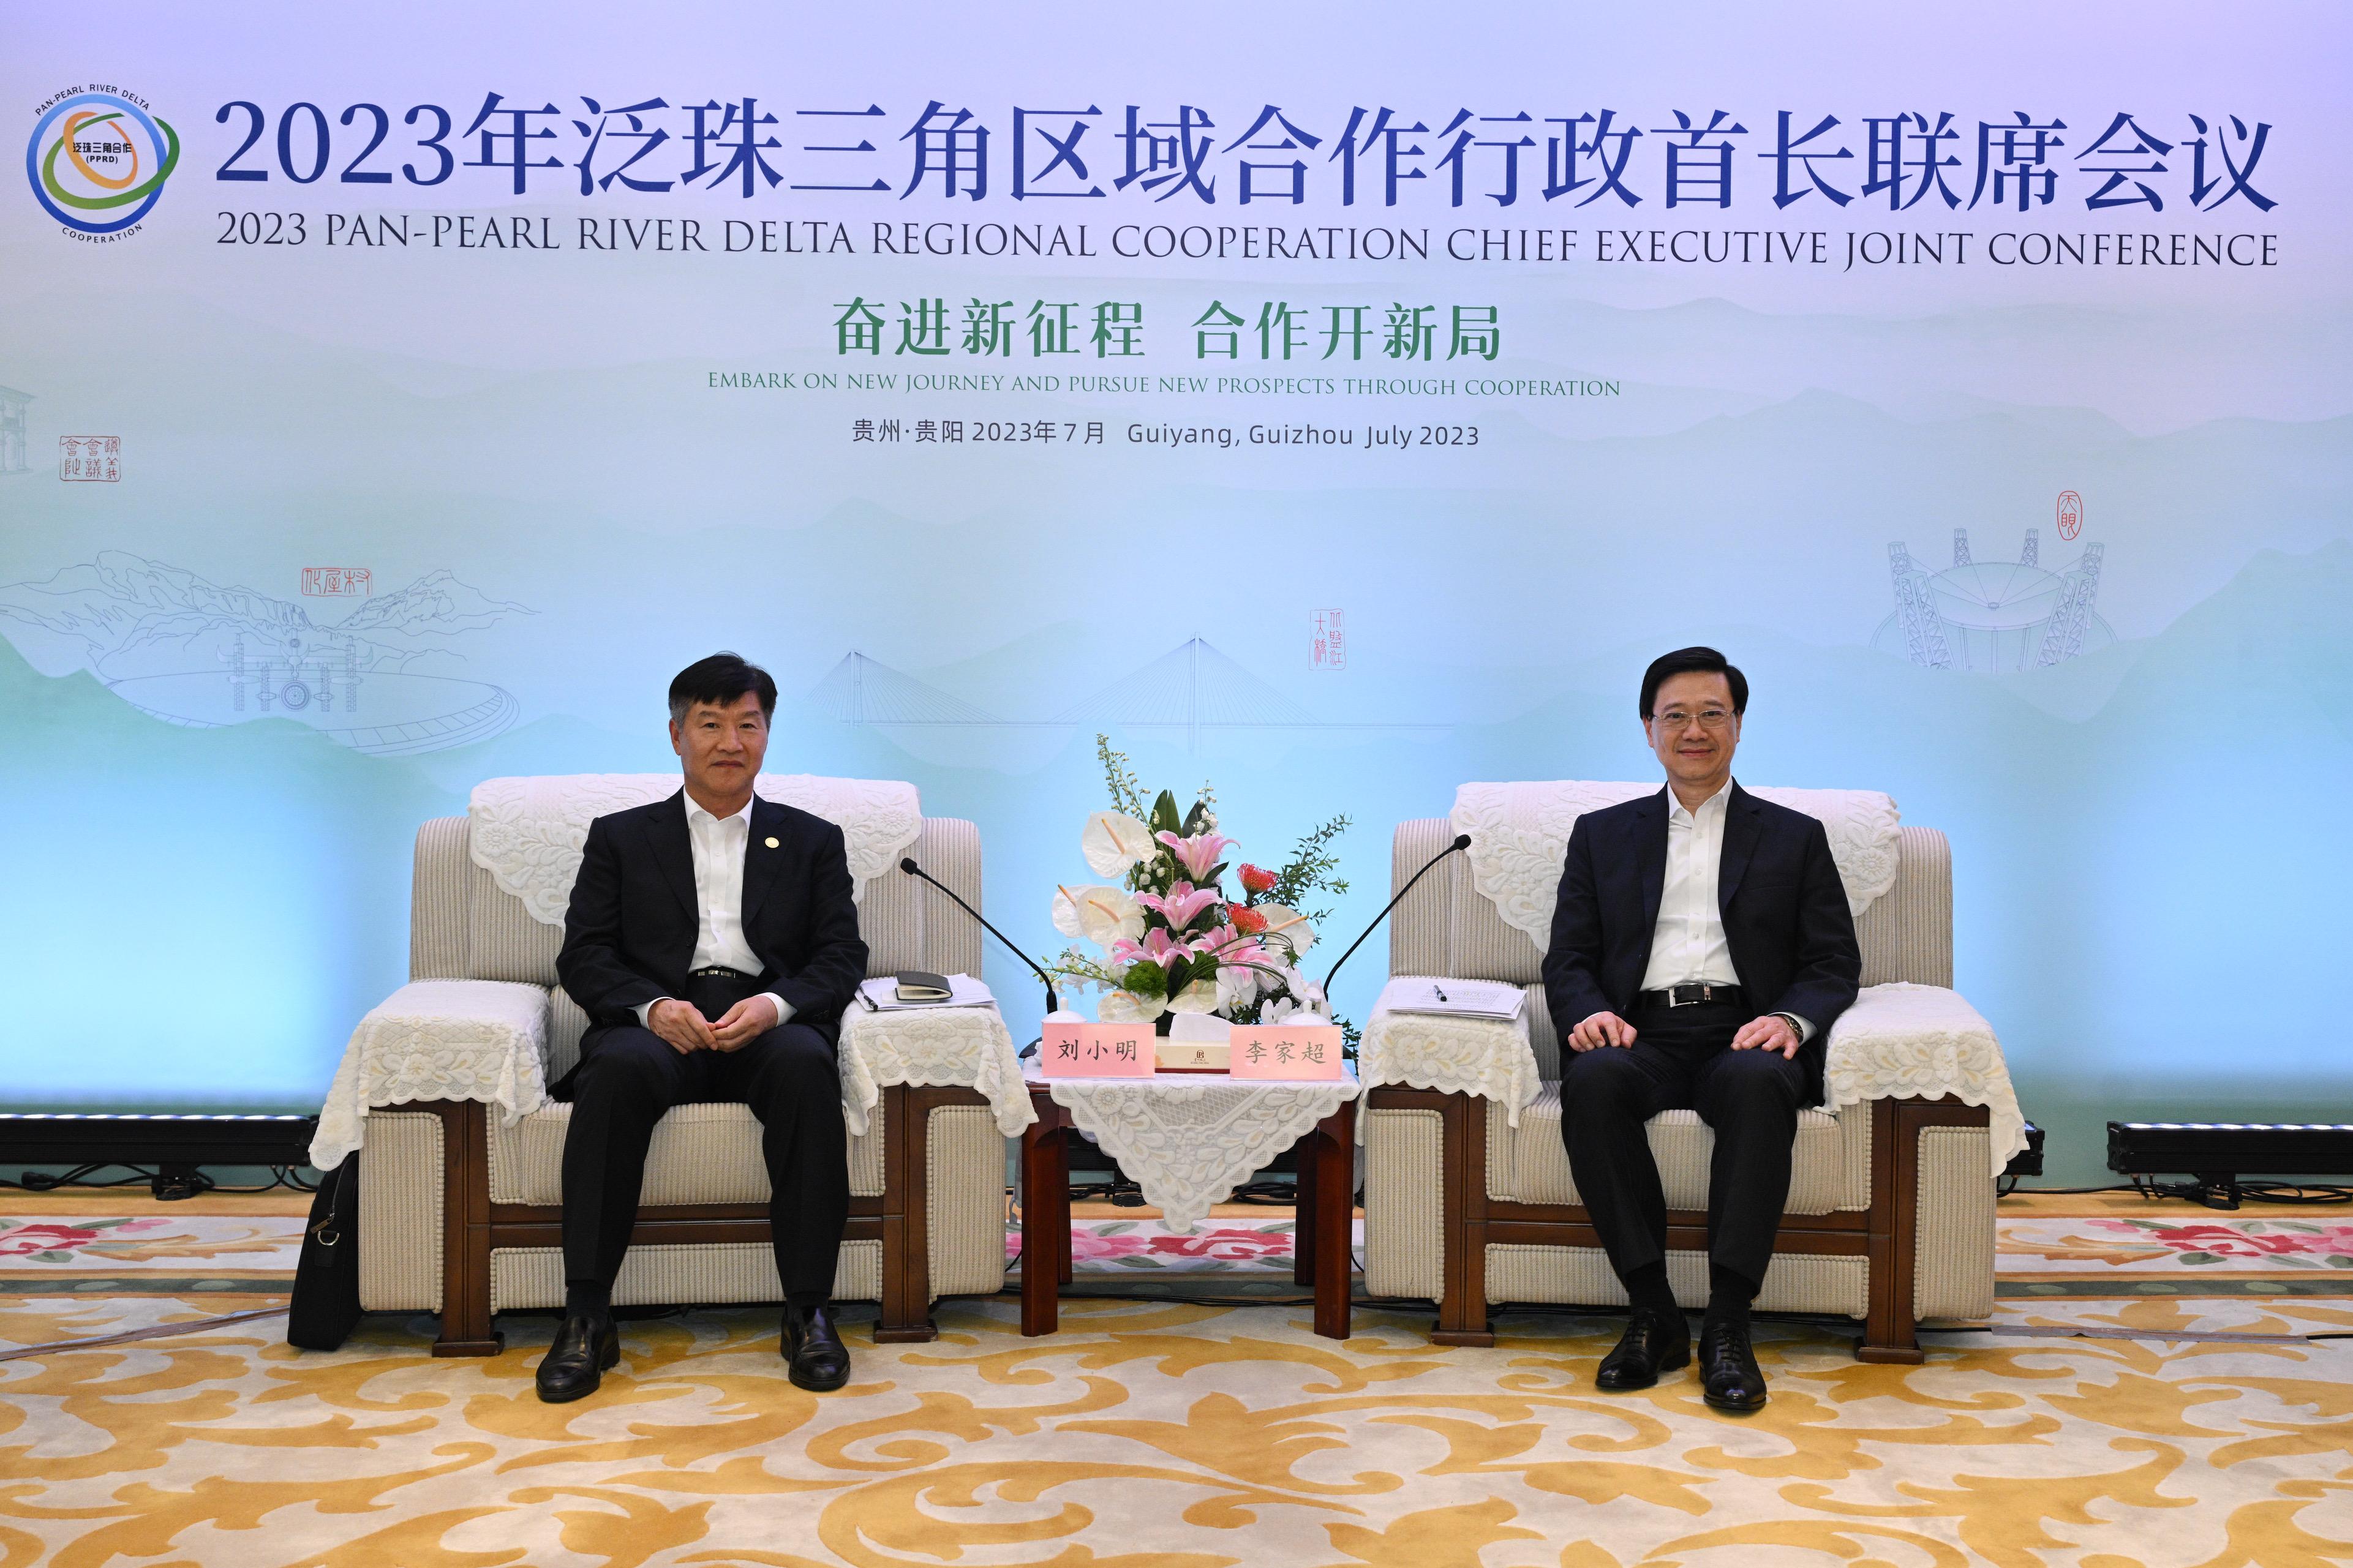 The Chief Executive, Mr John Lee, led a delegation to start his visit programme in Guiyang today (July 6). Photo shows Mr Lee (right) and the Governor of Hainan Province, Mr Liu Xiaoming (left), at a bilateral meeting in Guiyang.
